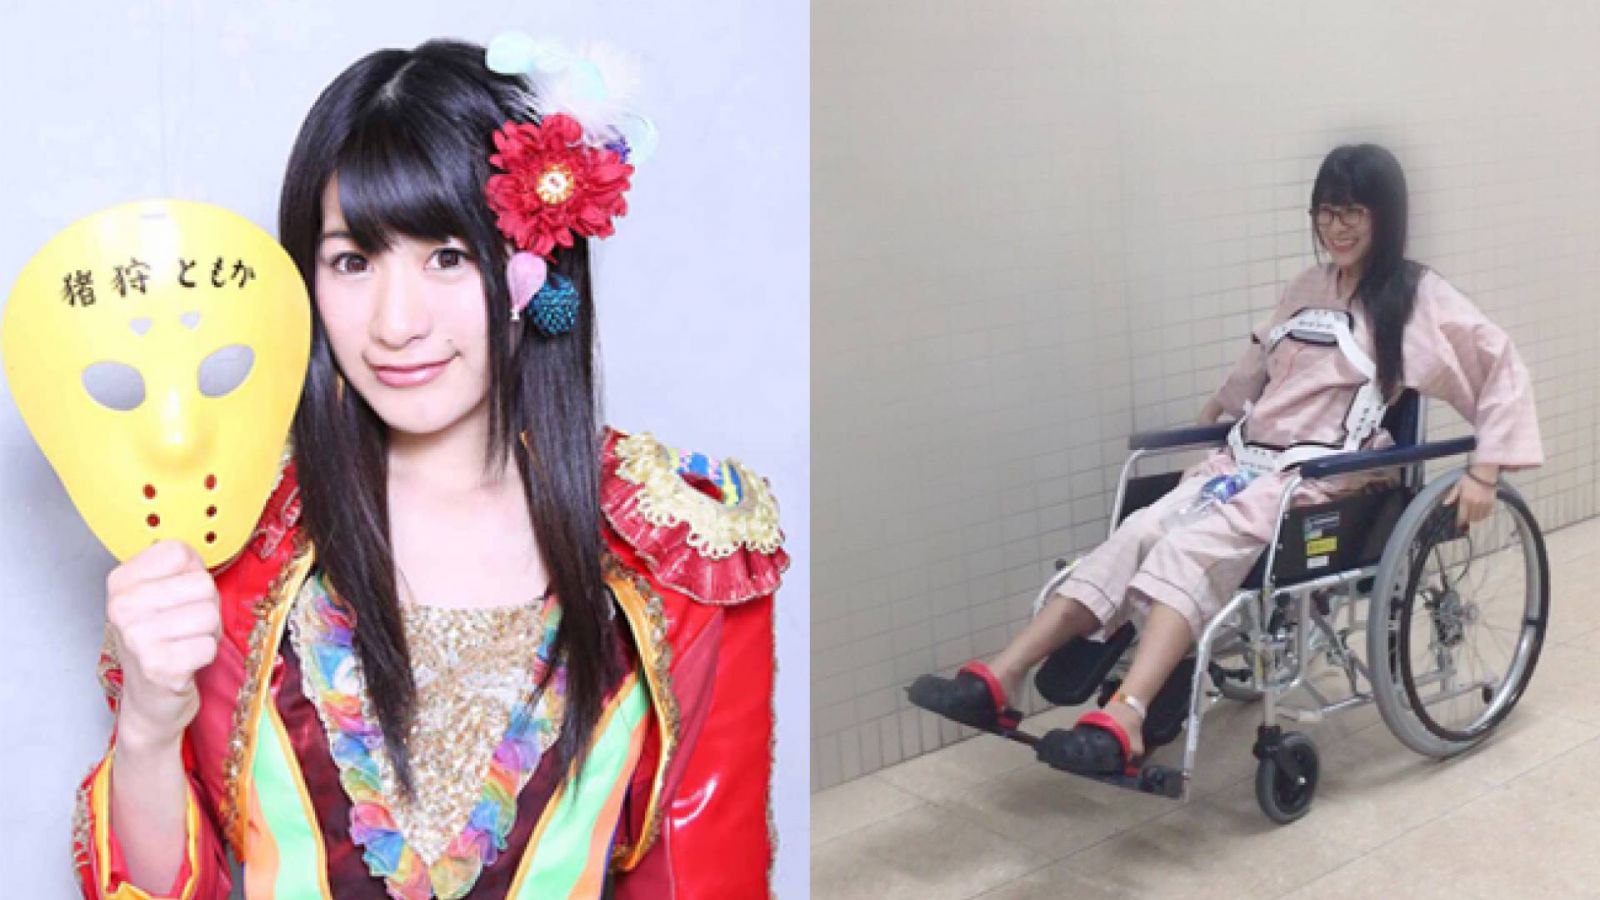 Kamen Joshi’s Tomoka Igari Vows to Move Forward After Injury, Aims to be Idol Group's First Wheelchair Performer © Kleeblatt inc. All rights reserved.